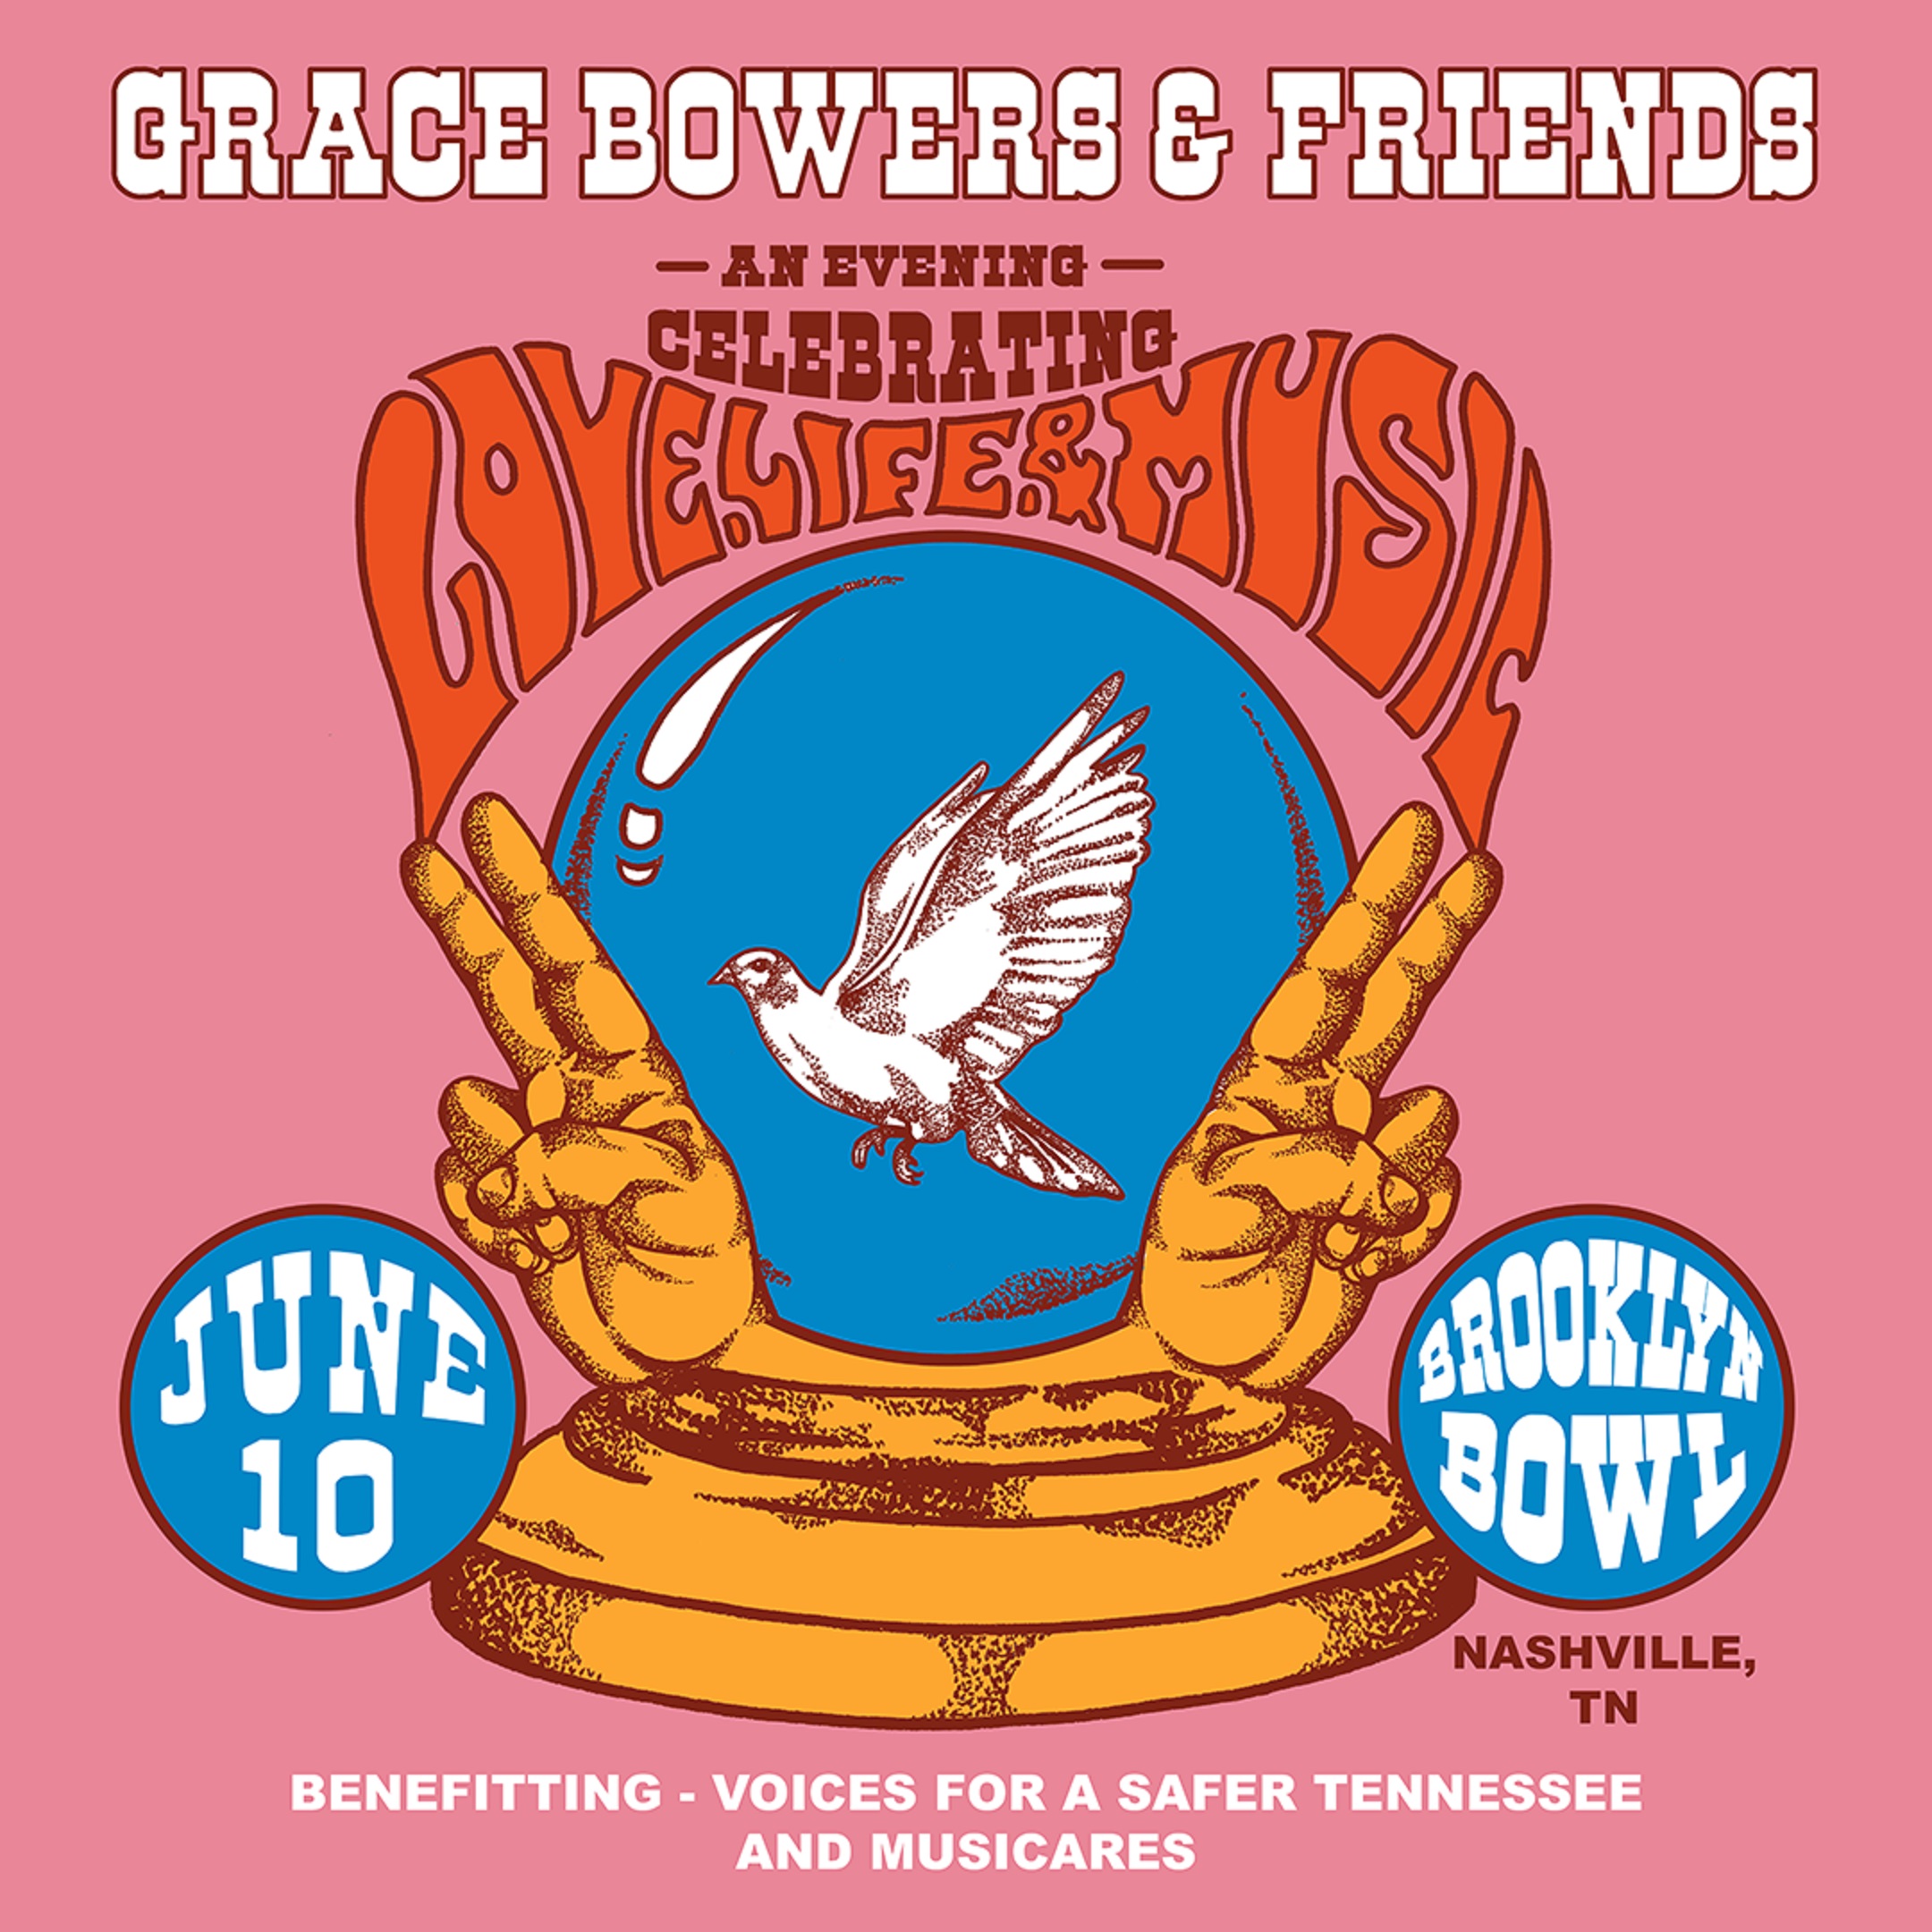 Grace Bowers unveils lineup for 2nd annual “An Evening Supporting Love, Life & Music” benefit concert, June 10 at Nashville's Brooklyn Bowl